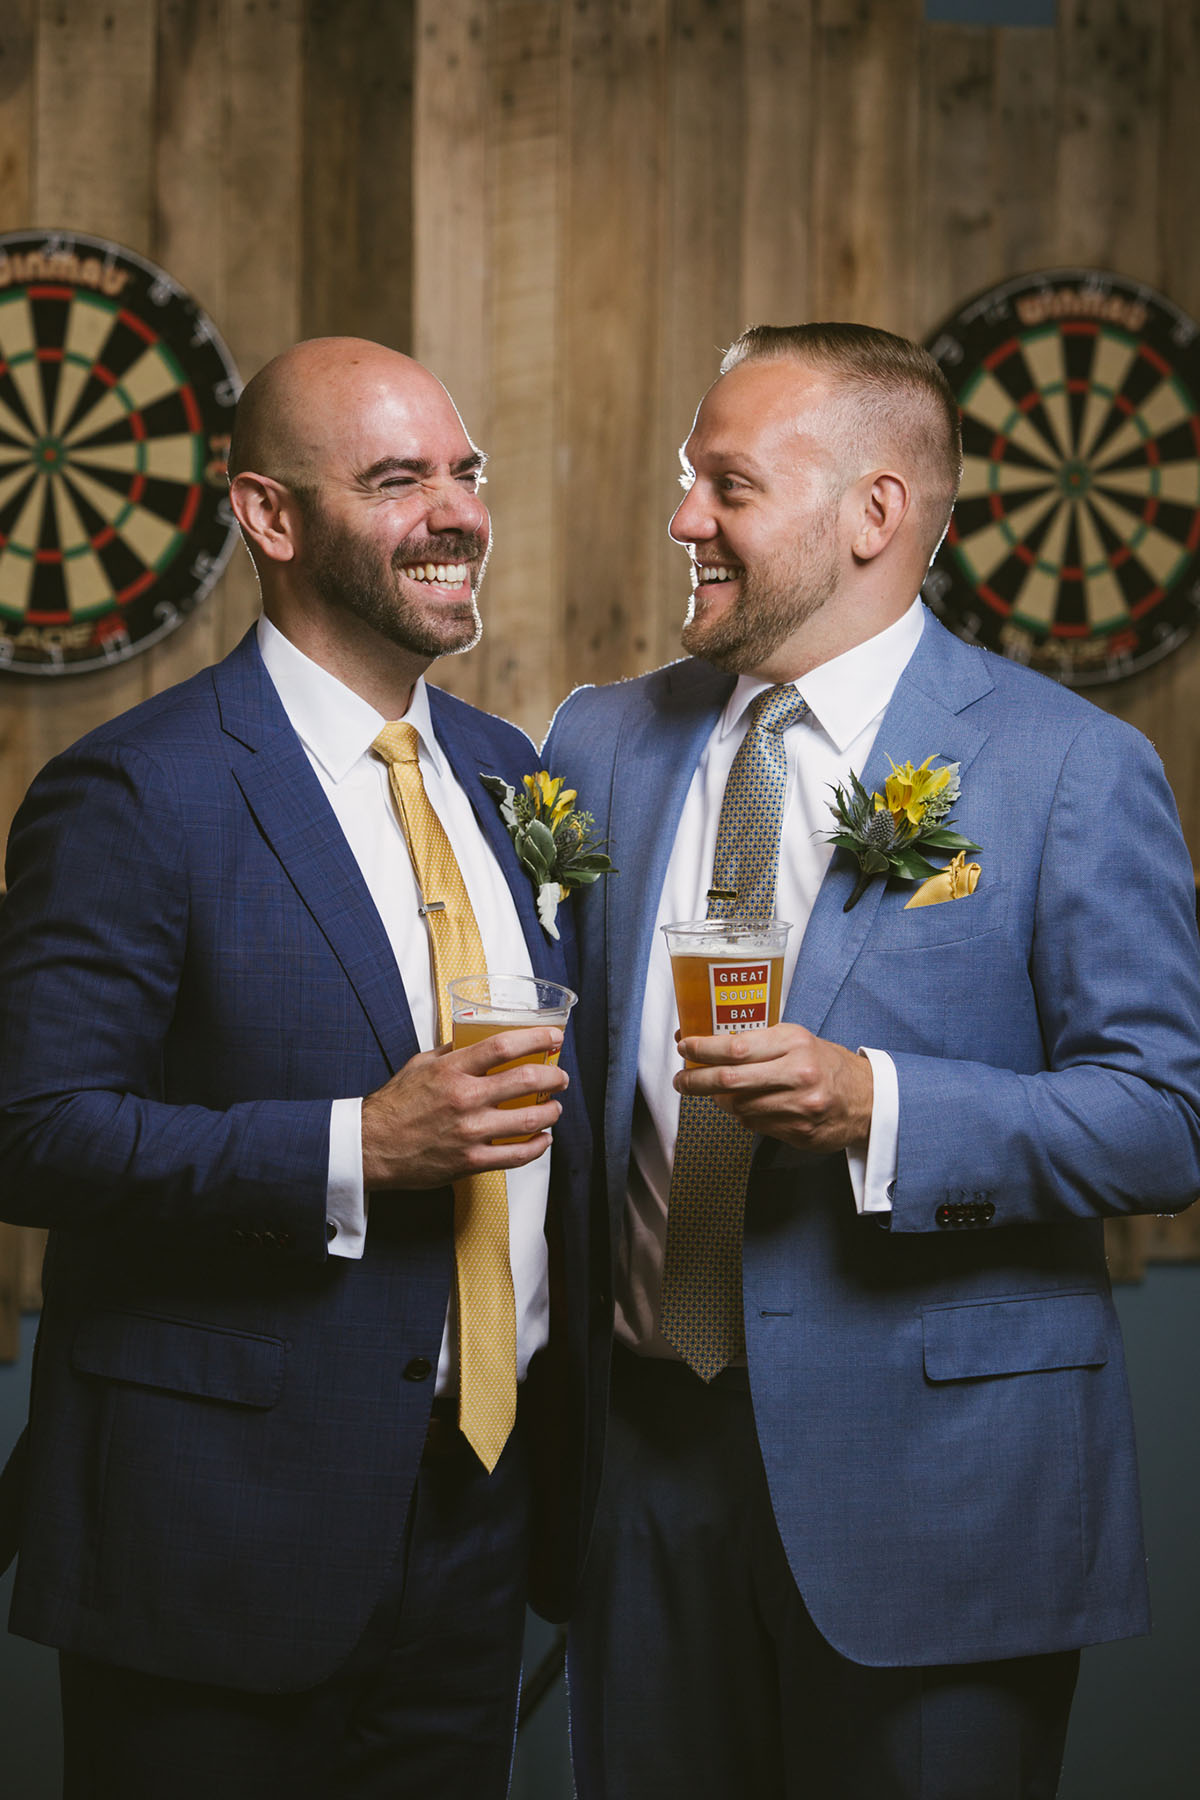 Waterfront brewery elopement at The Piermont in Babylon, New York LGBTQ+ weddings two grooms gay wedding succulents beach terrariums blue tuxedos